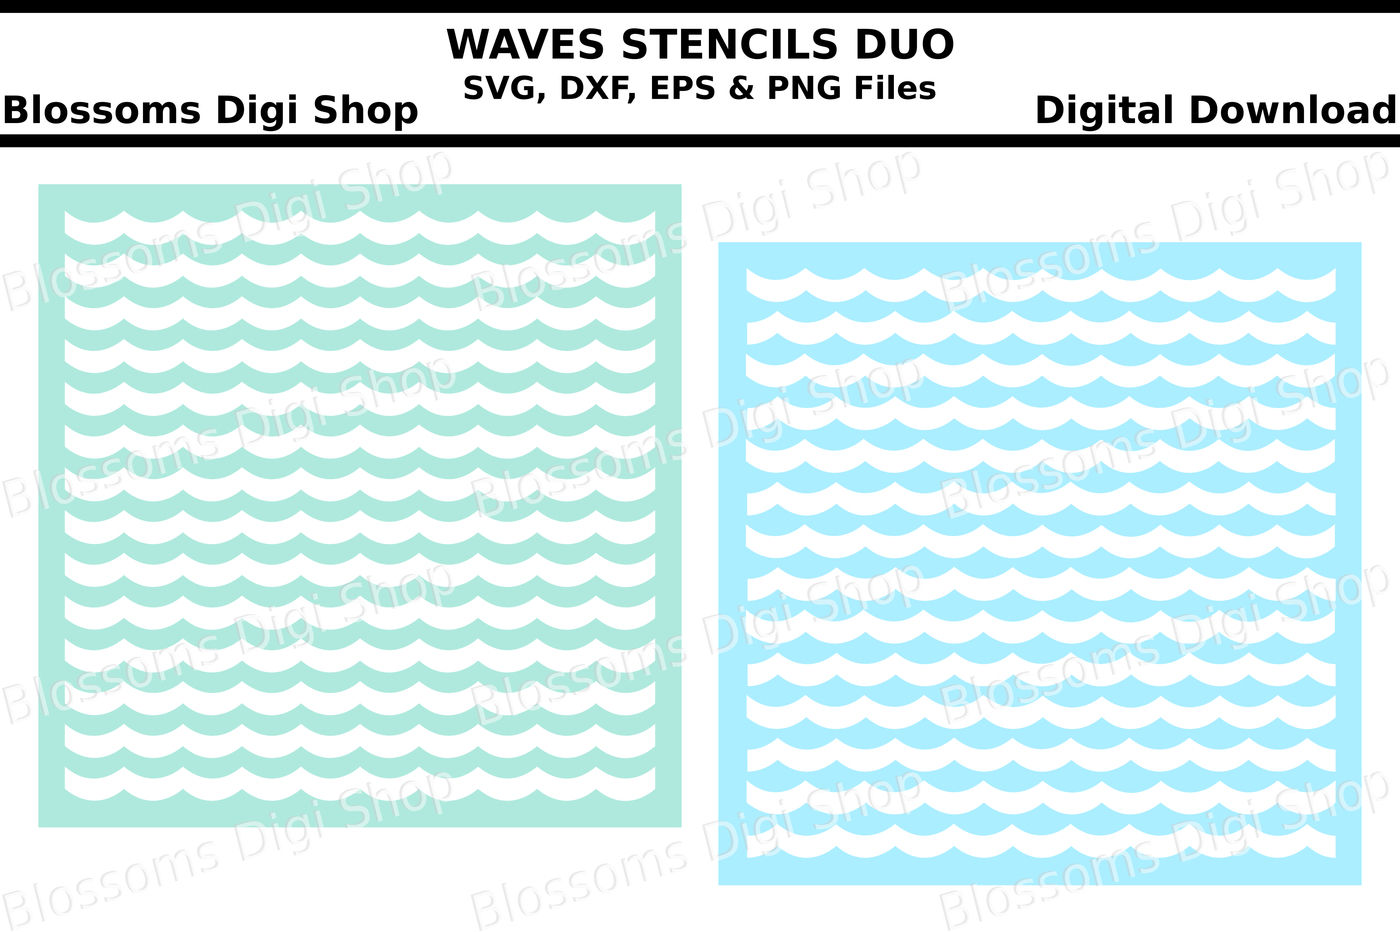 ori 29950 9ac9c8874d248f525352cc85c8c4fa989f6a05a9 waves stencil duo svg dxf eps and png cut files